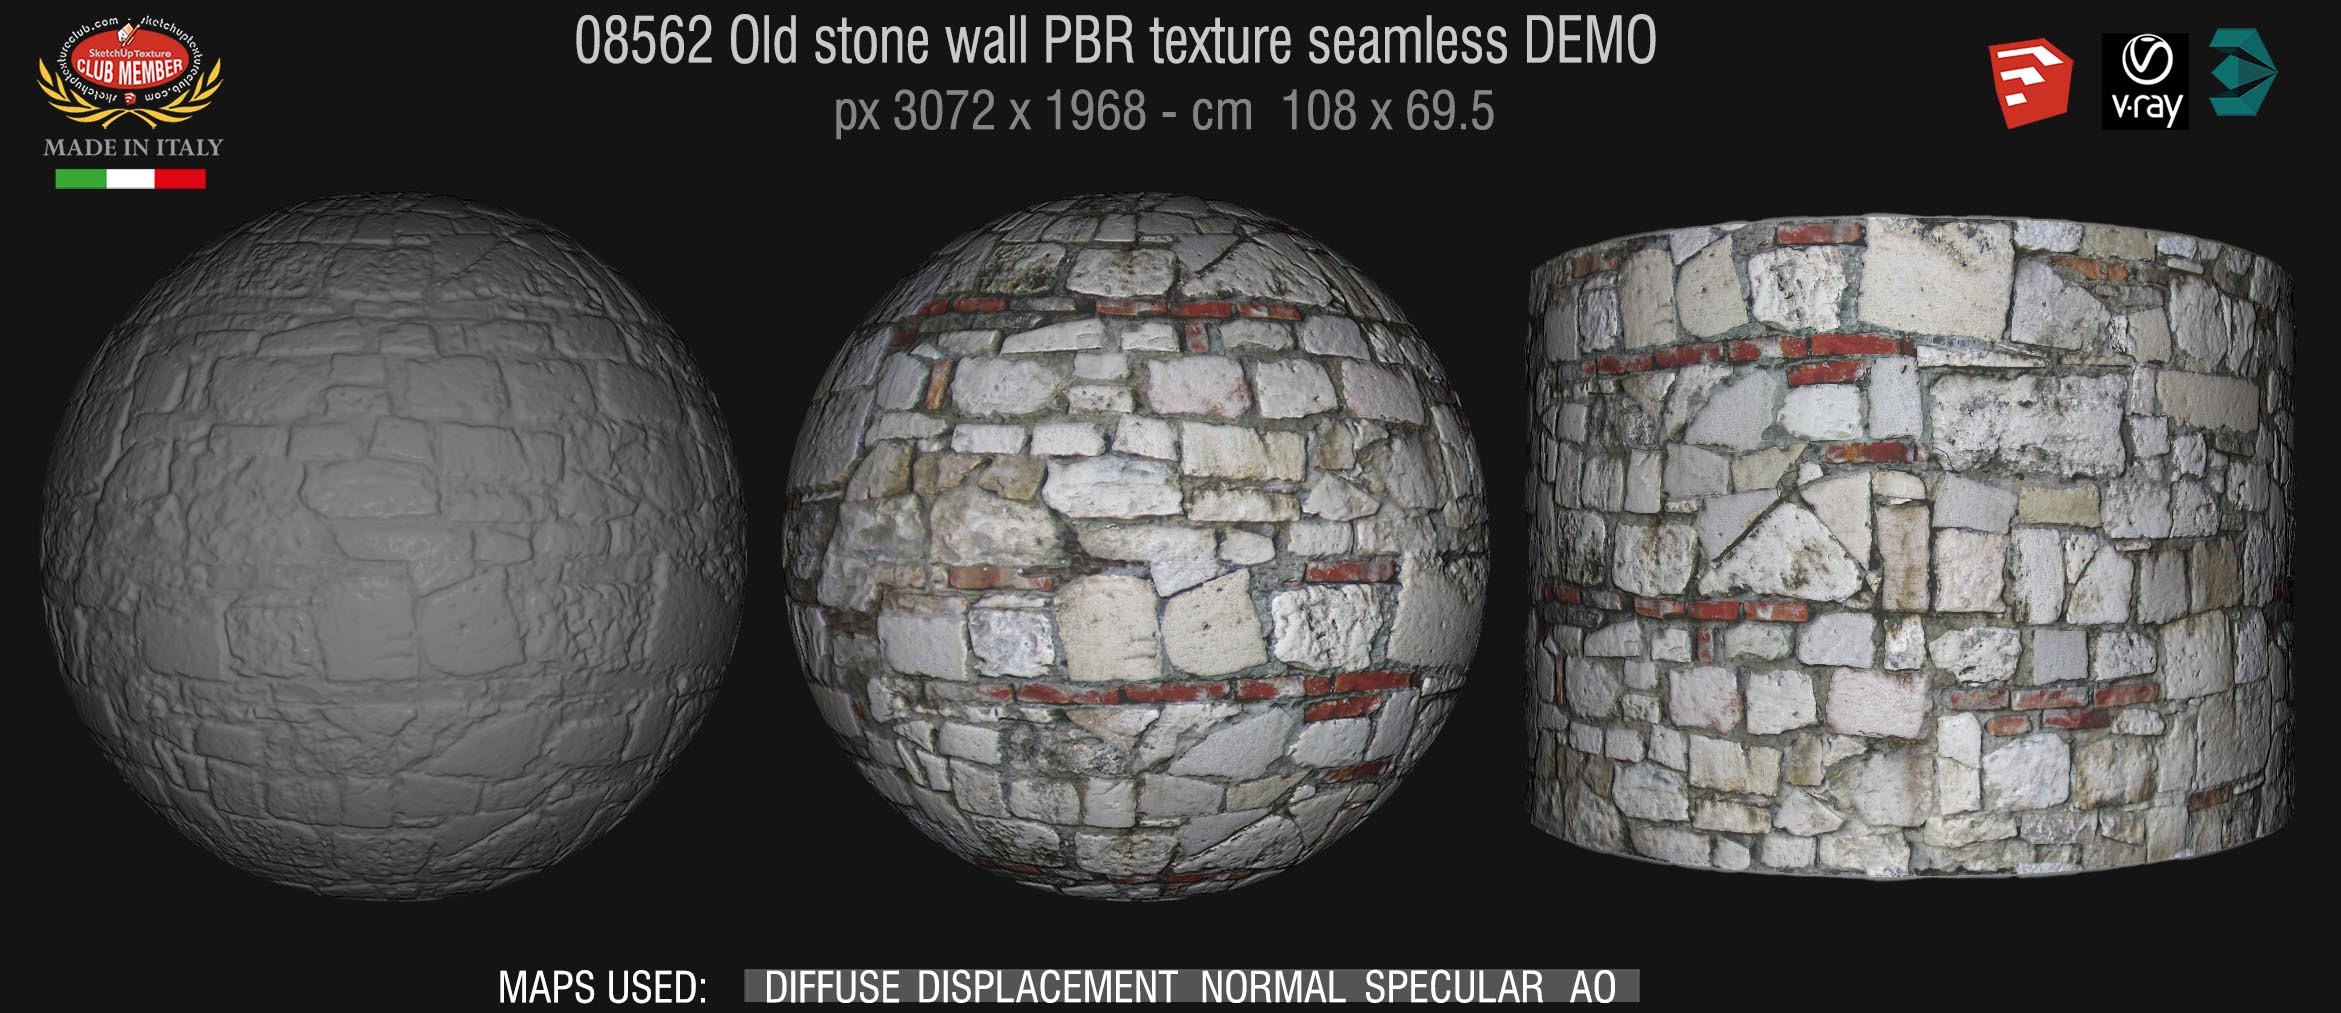 08562 Old stone wall PBR texture seamless DEMO